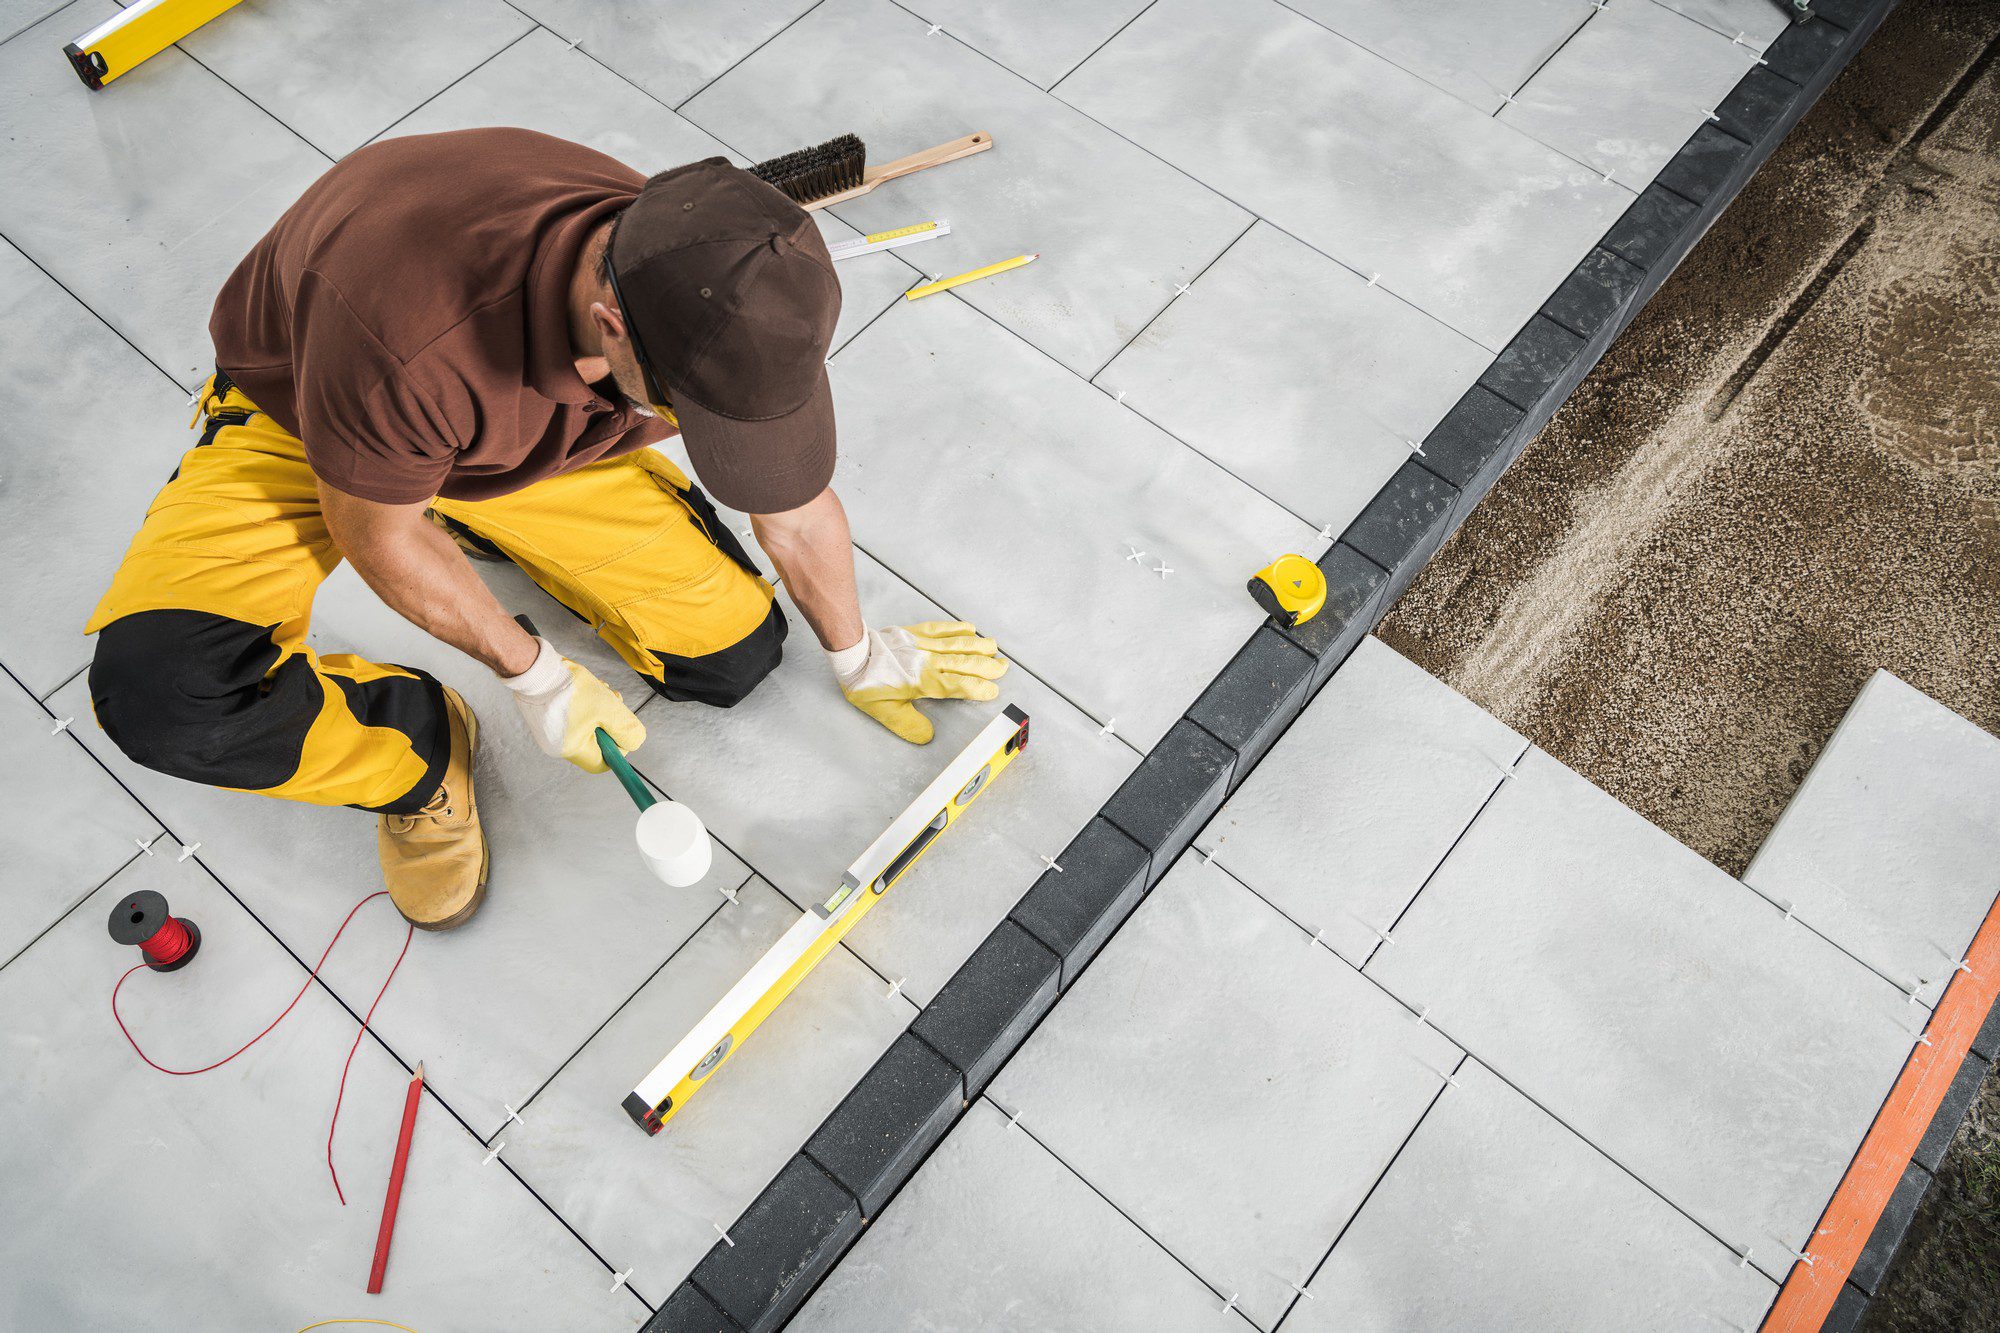 The image shows a person engaged in the process of laying and leveling paving stones or tiles for outdoor flooring. The individual is wearing protective gloves and kneeling on the ground, working on the pavers. Around them, there are various tools visible including a level, a rubber mallet, spacers for maintaining even gaps between the pavers, a tape measure, and what appears to be a string line to ensure straight placement. It appears that the person is ensuring the tiles are level and properly aligned. The paved area is bordered by a thicker edging material, and you can see the sand base layer where additional pavers are yet to be laid. The scene suggests the person is likely a professional working on a landscaping or construction project, focusing on creating a flat, well-constructed surface.